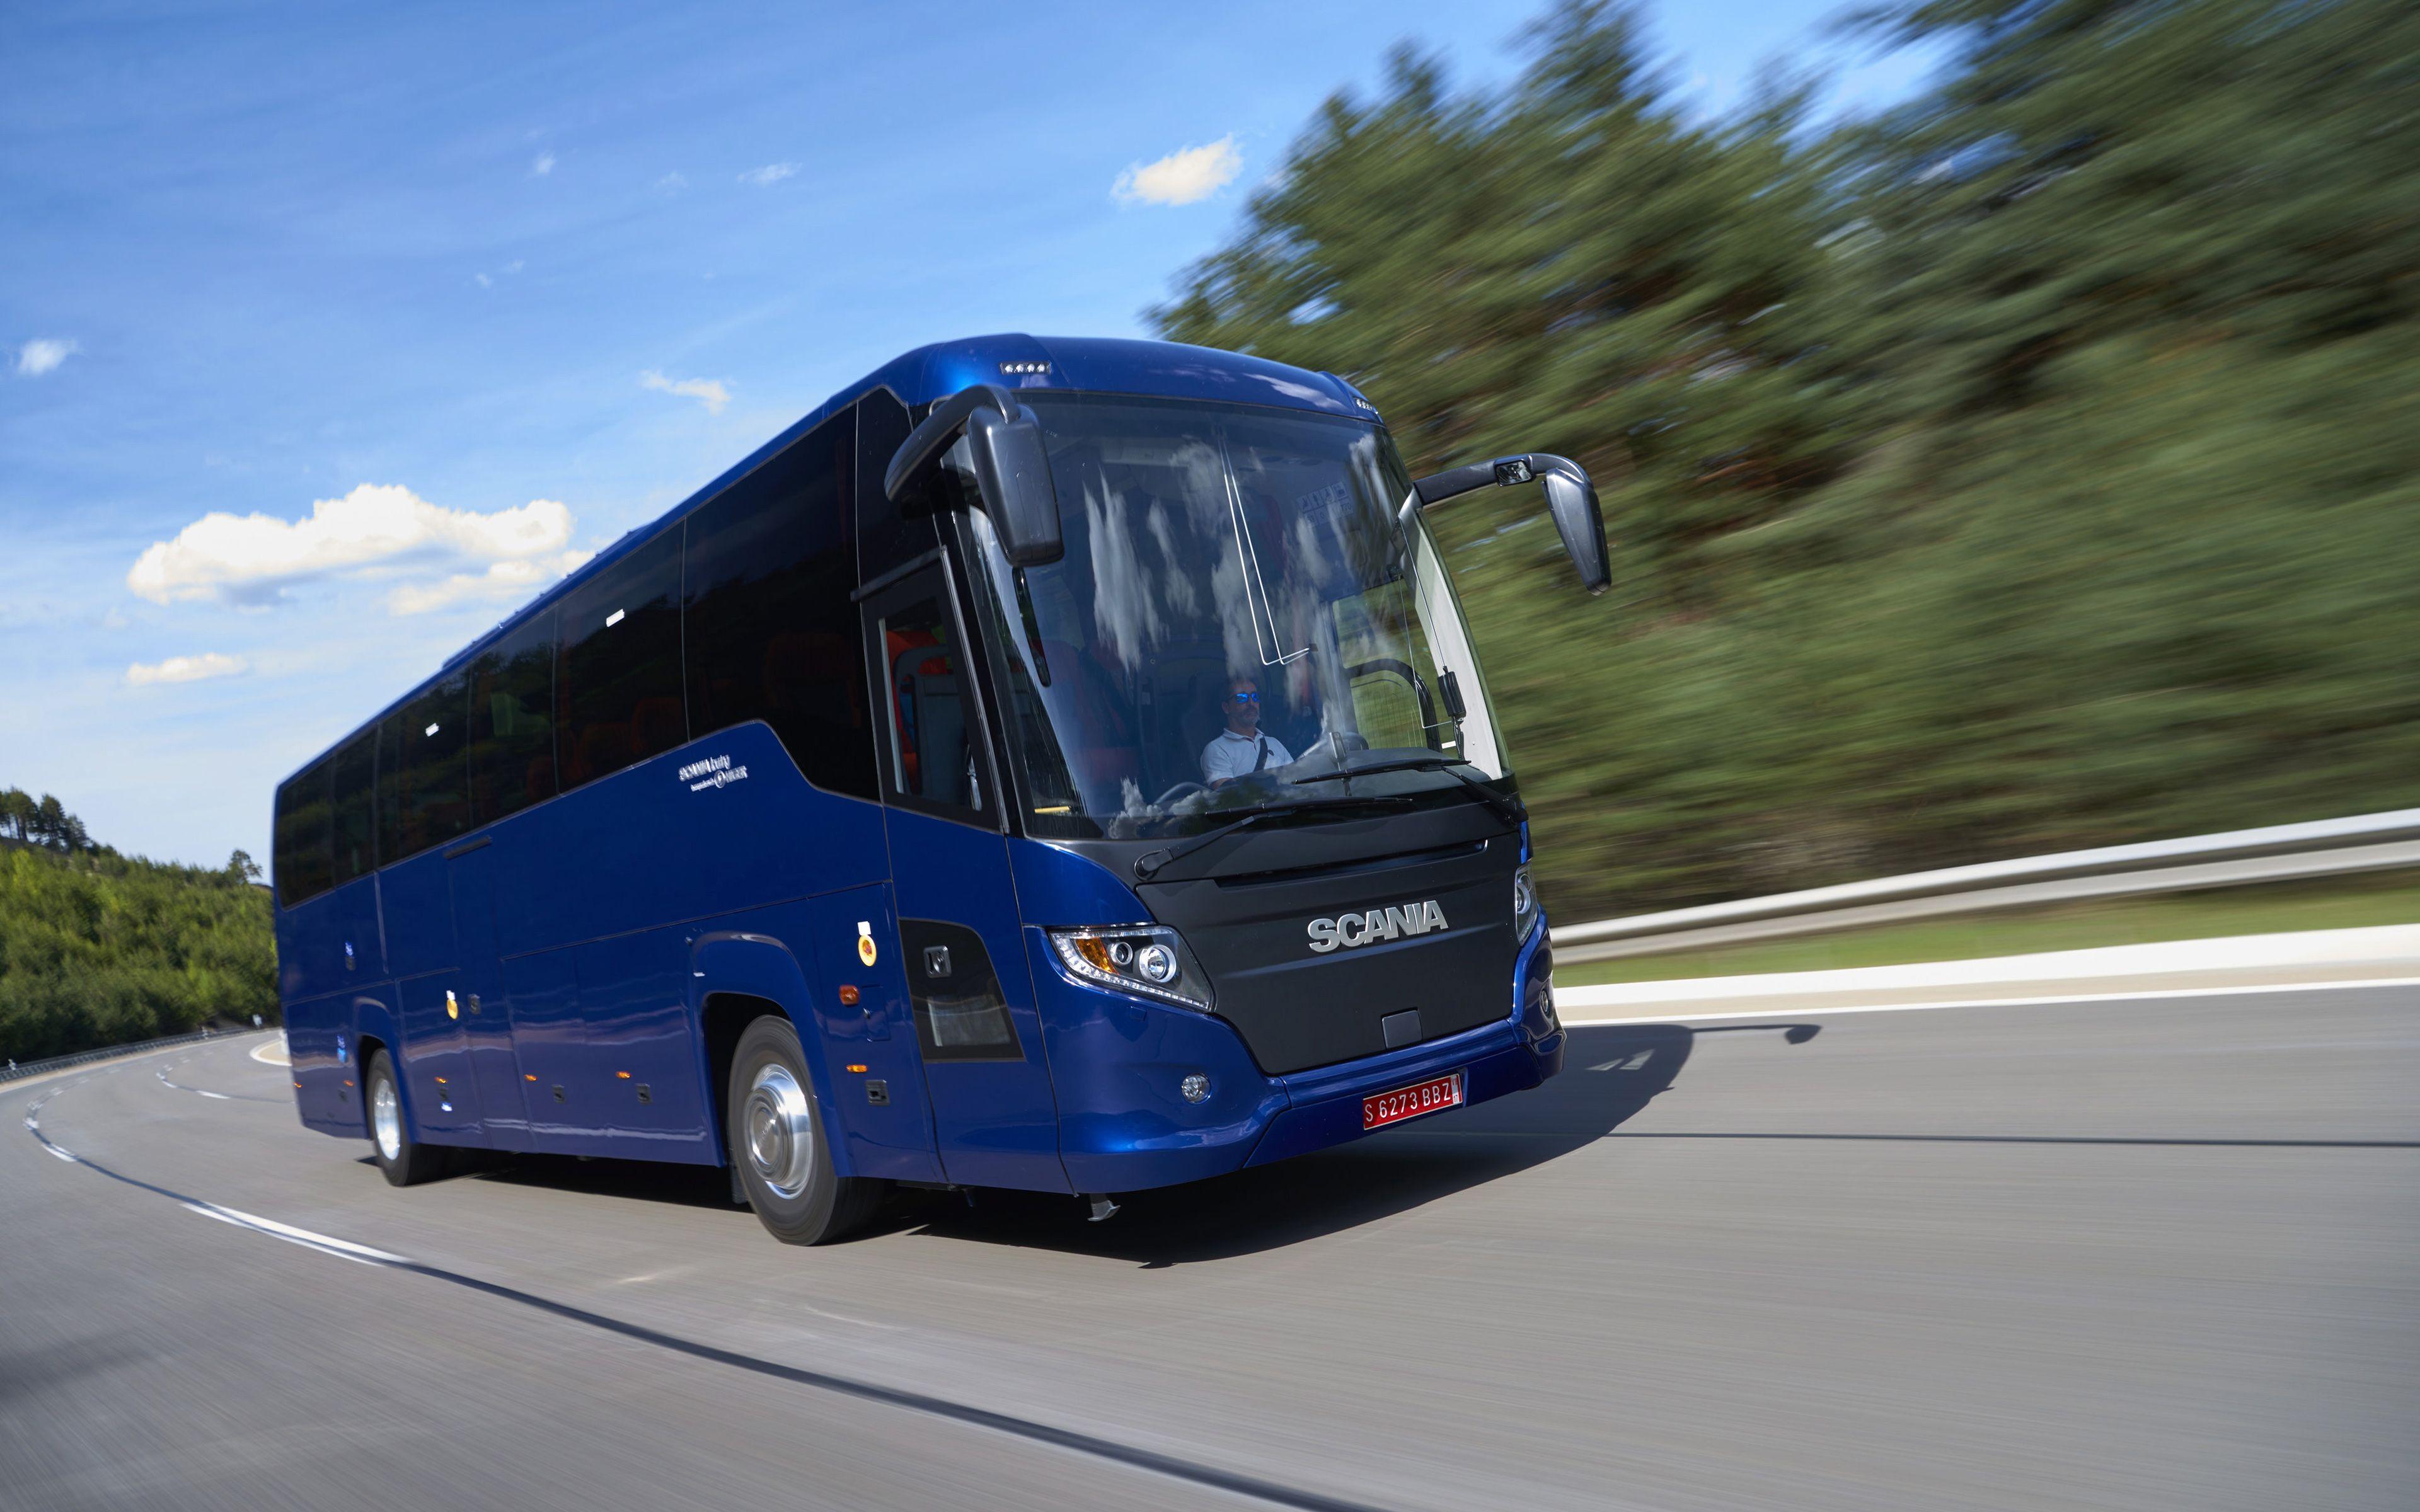 Download wallpaper 4k, Scania Touring, road, 2018 buses, blue bus